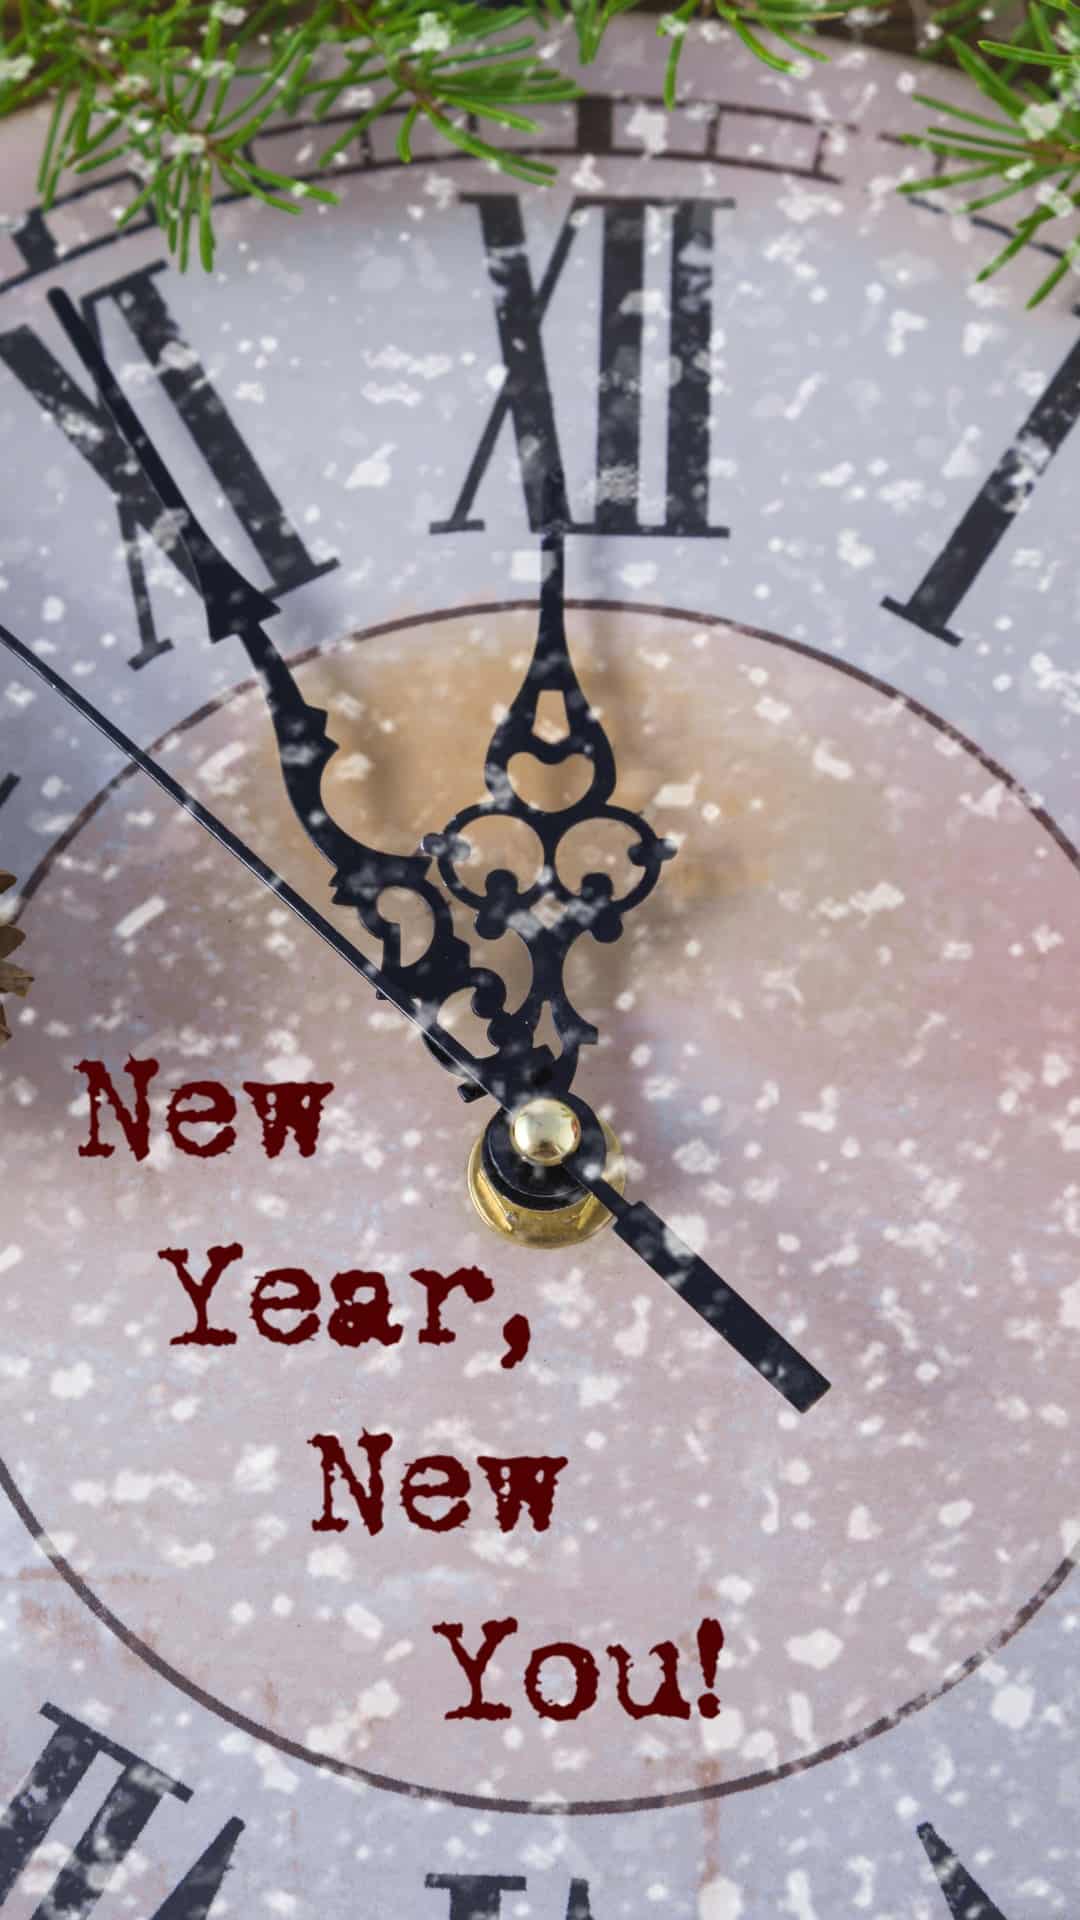 Happy New Years Wallpaper iPhone Background Inspiration Aesthetic